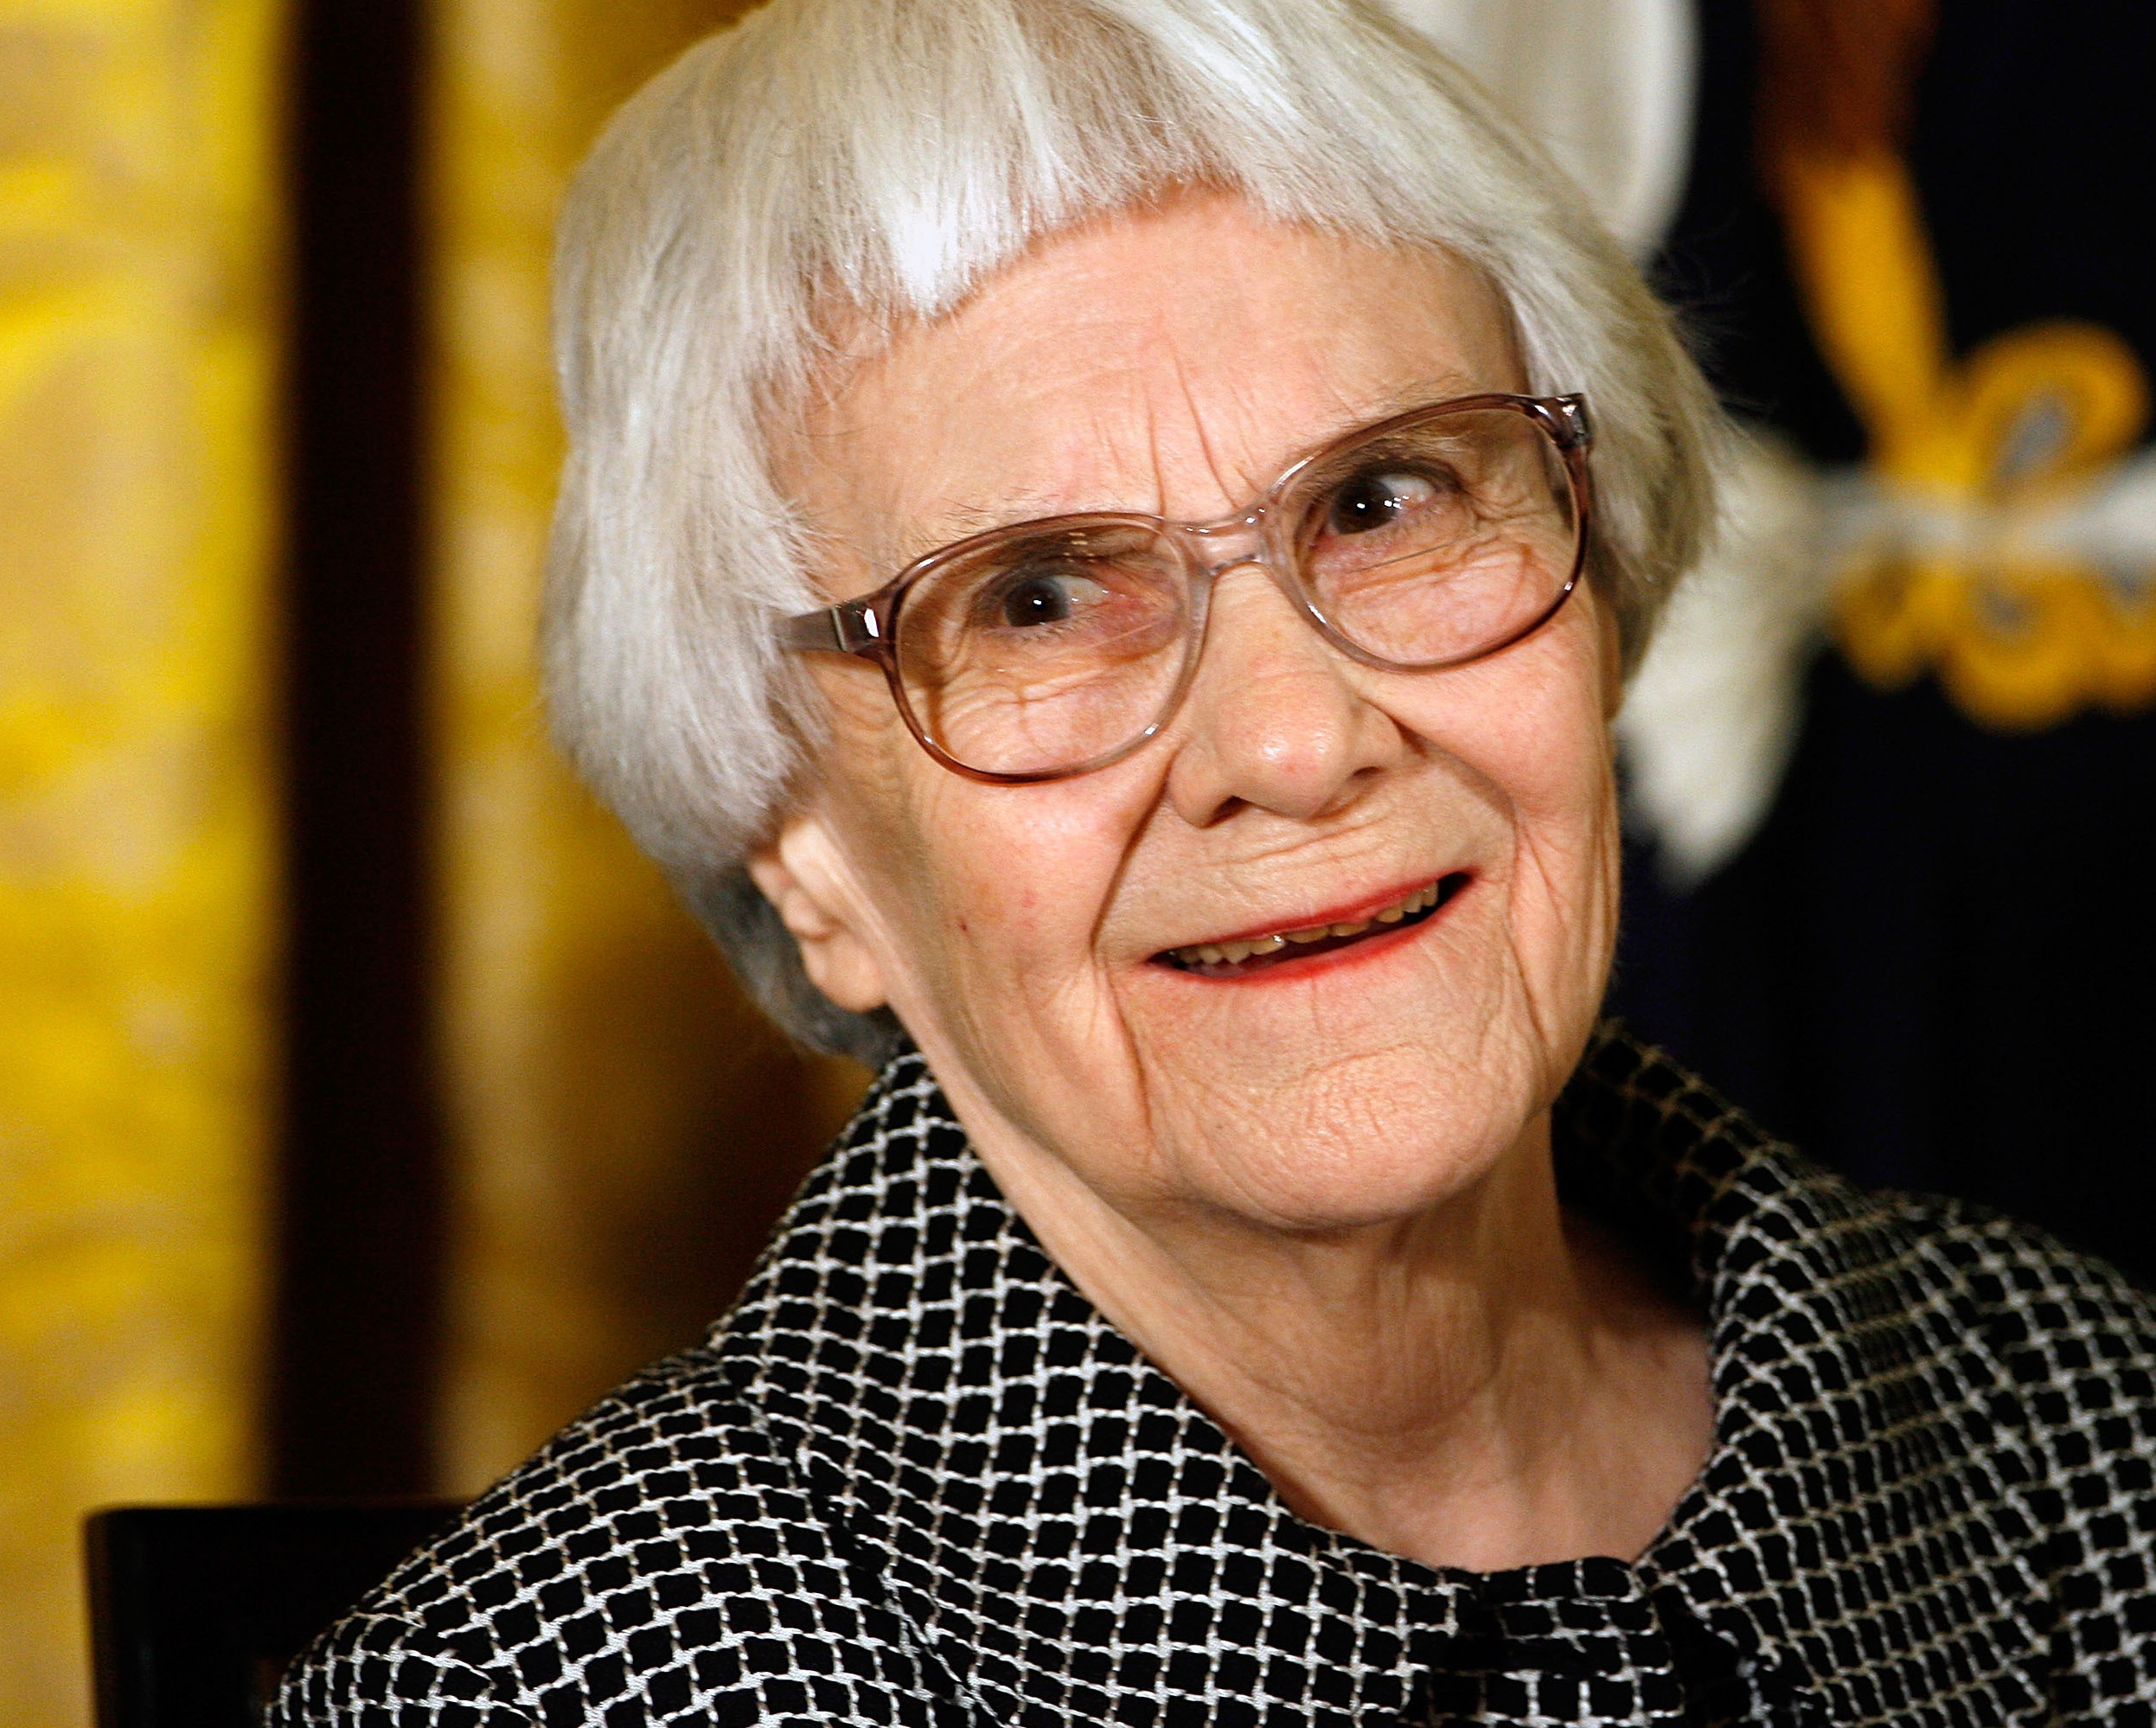 AUTHOR SUNDAY - Alabama is proud of our native Alabama lady, Miss Harper Lee